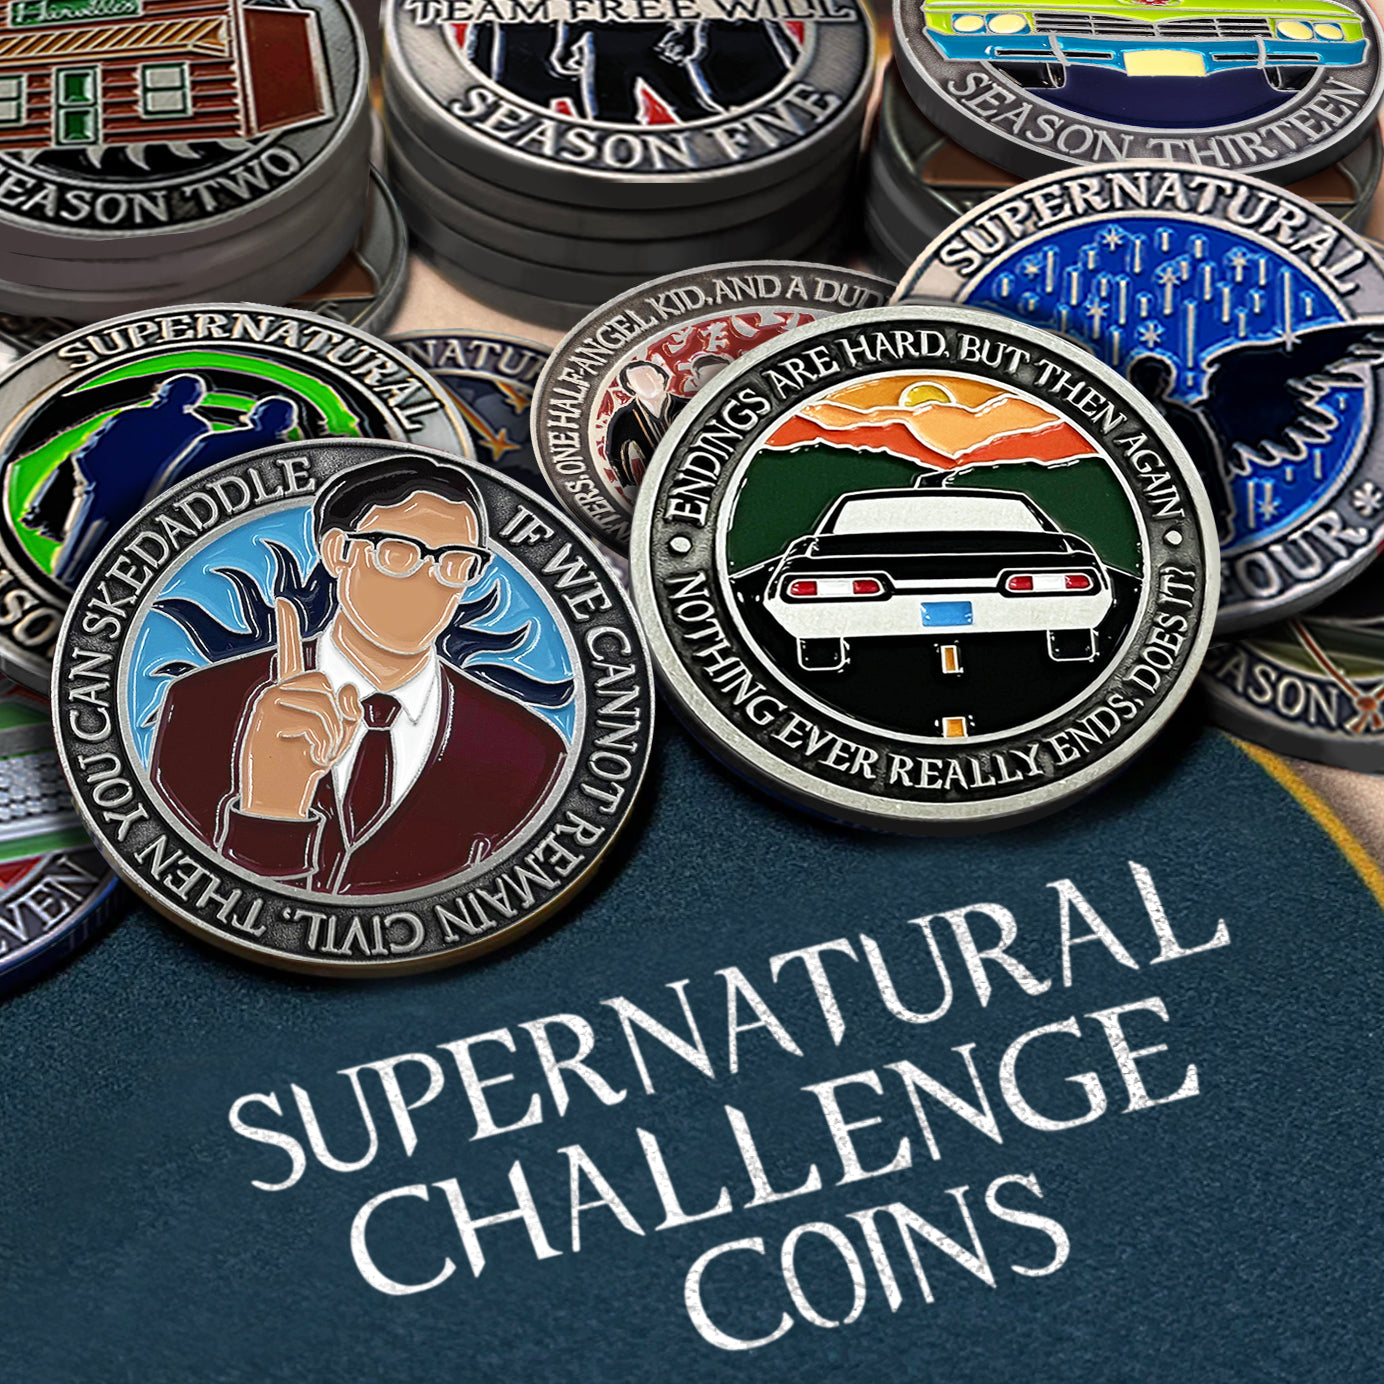 An image of stacks of Supernatural challenge coins. The back rows are neatly stacked, while the front row has coins scattered on top of each other as if tossed onto the table top. The bottom reads "Supernatural Challenge Coins" in white all-caps.